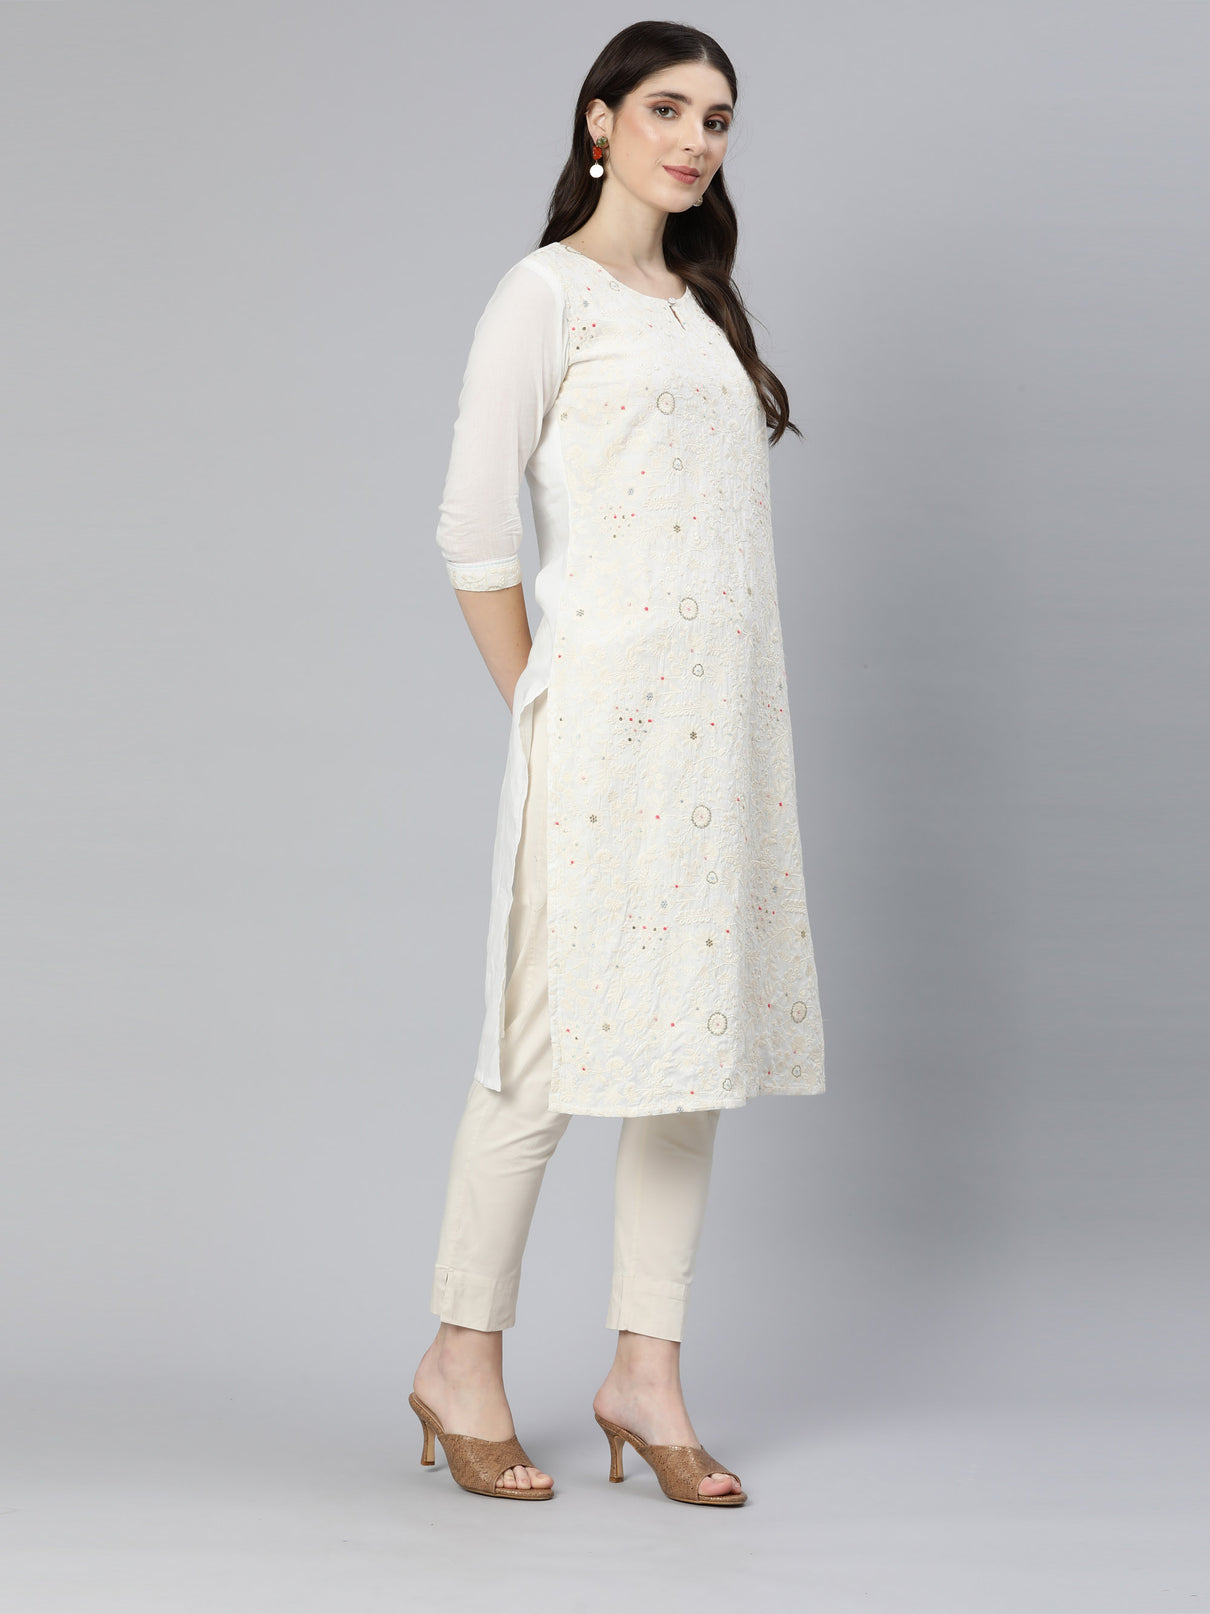 All-Over embroidered kurta with a basic formal silhouette